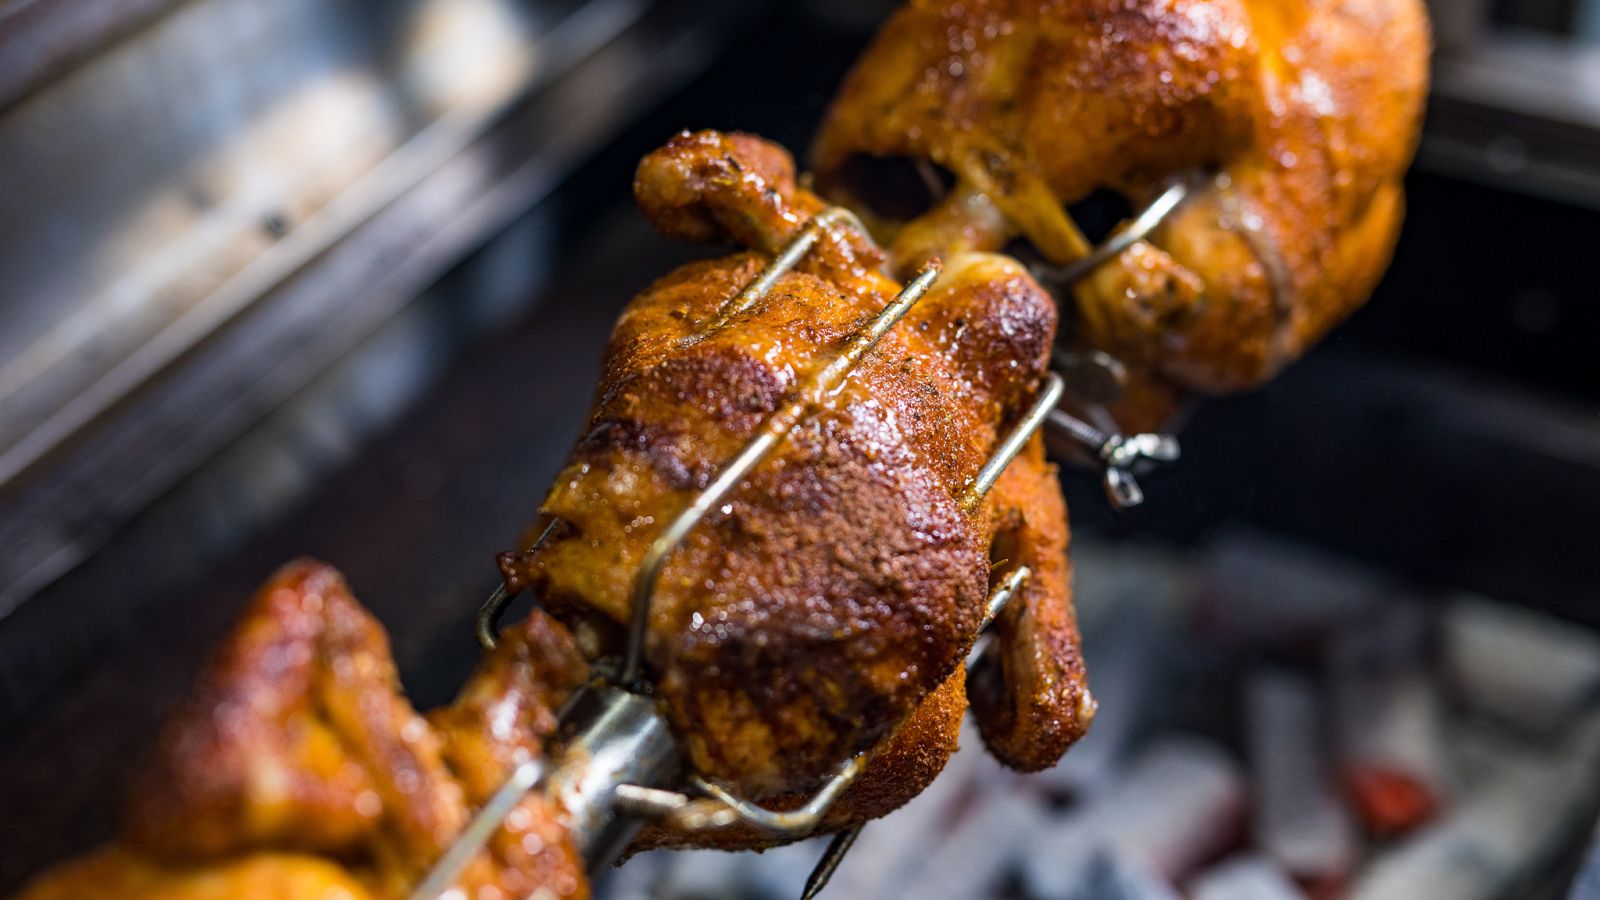 This image shows Rotisserie Chickens